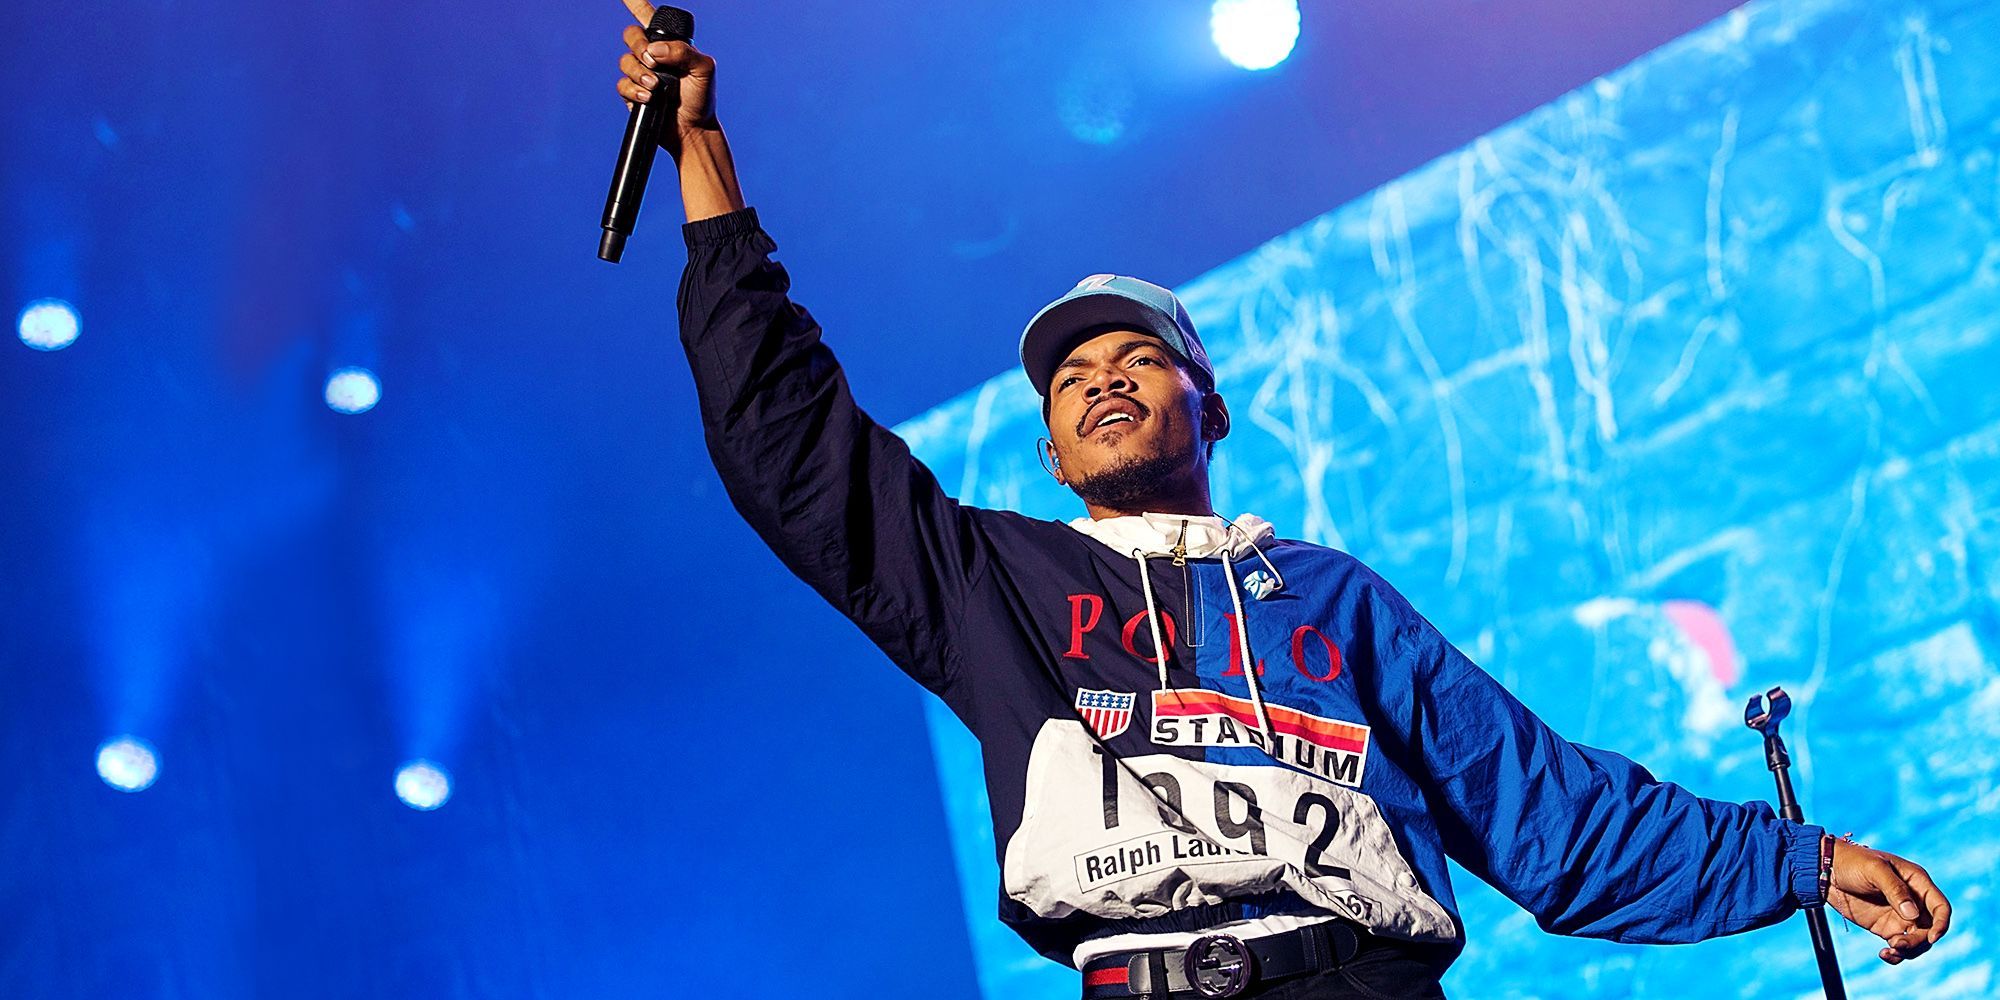 A man in blue jacket and hat holding up his hand - Chance the Rapper